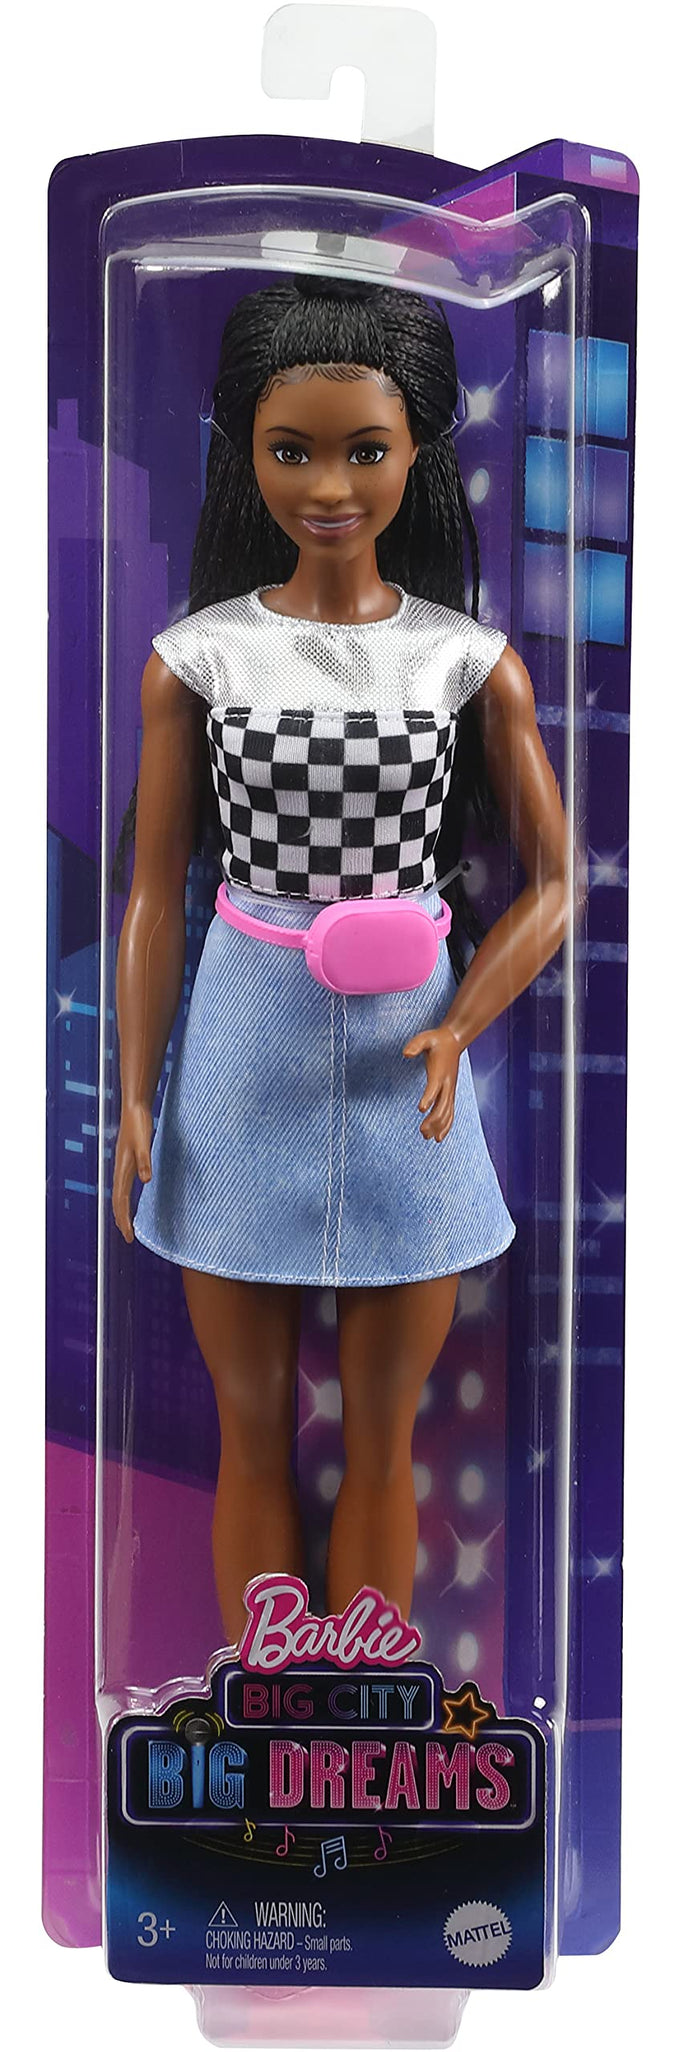 Barbie: Big City, Big Dreams Barbie “Brooklyn” Roberts Doll (11.5-in, Brunette Braided Hair) Wearing Shimmery Top, Skirt & Accessories, Gift for 3 to 7 Year Olds